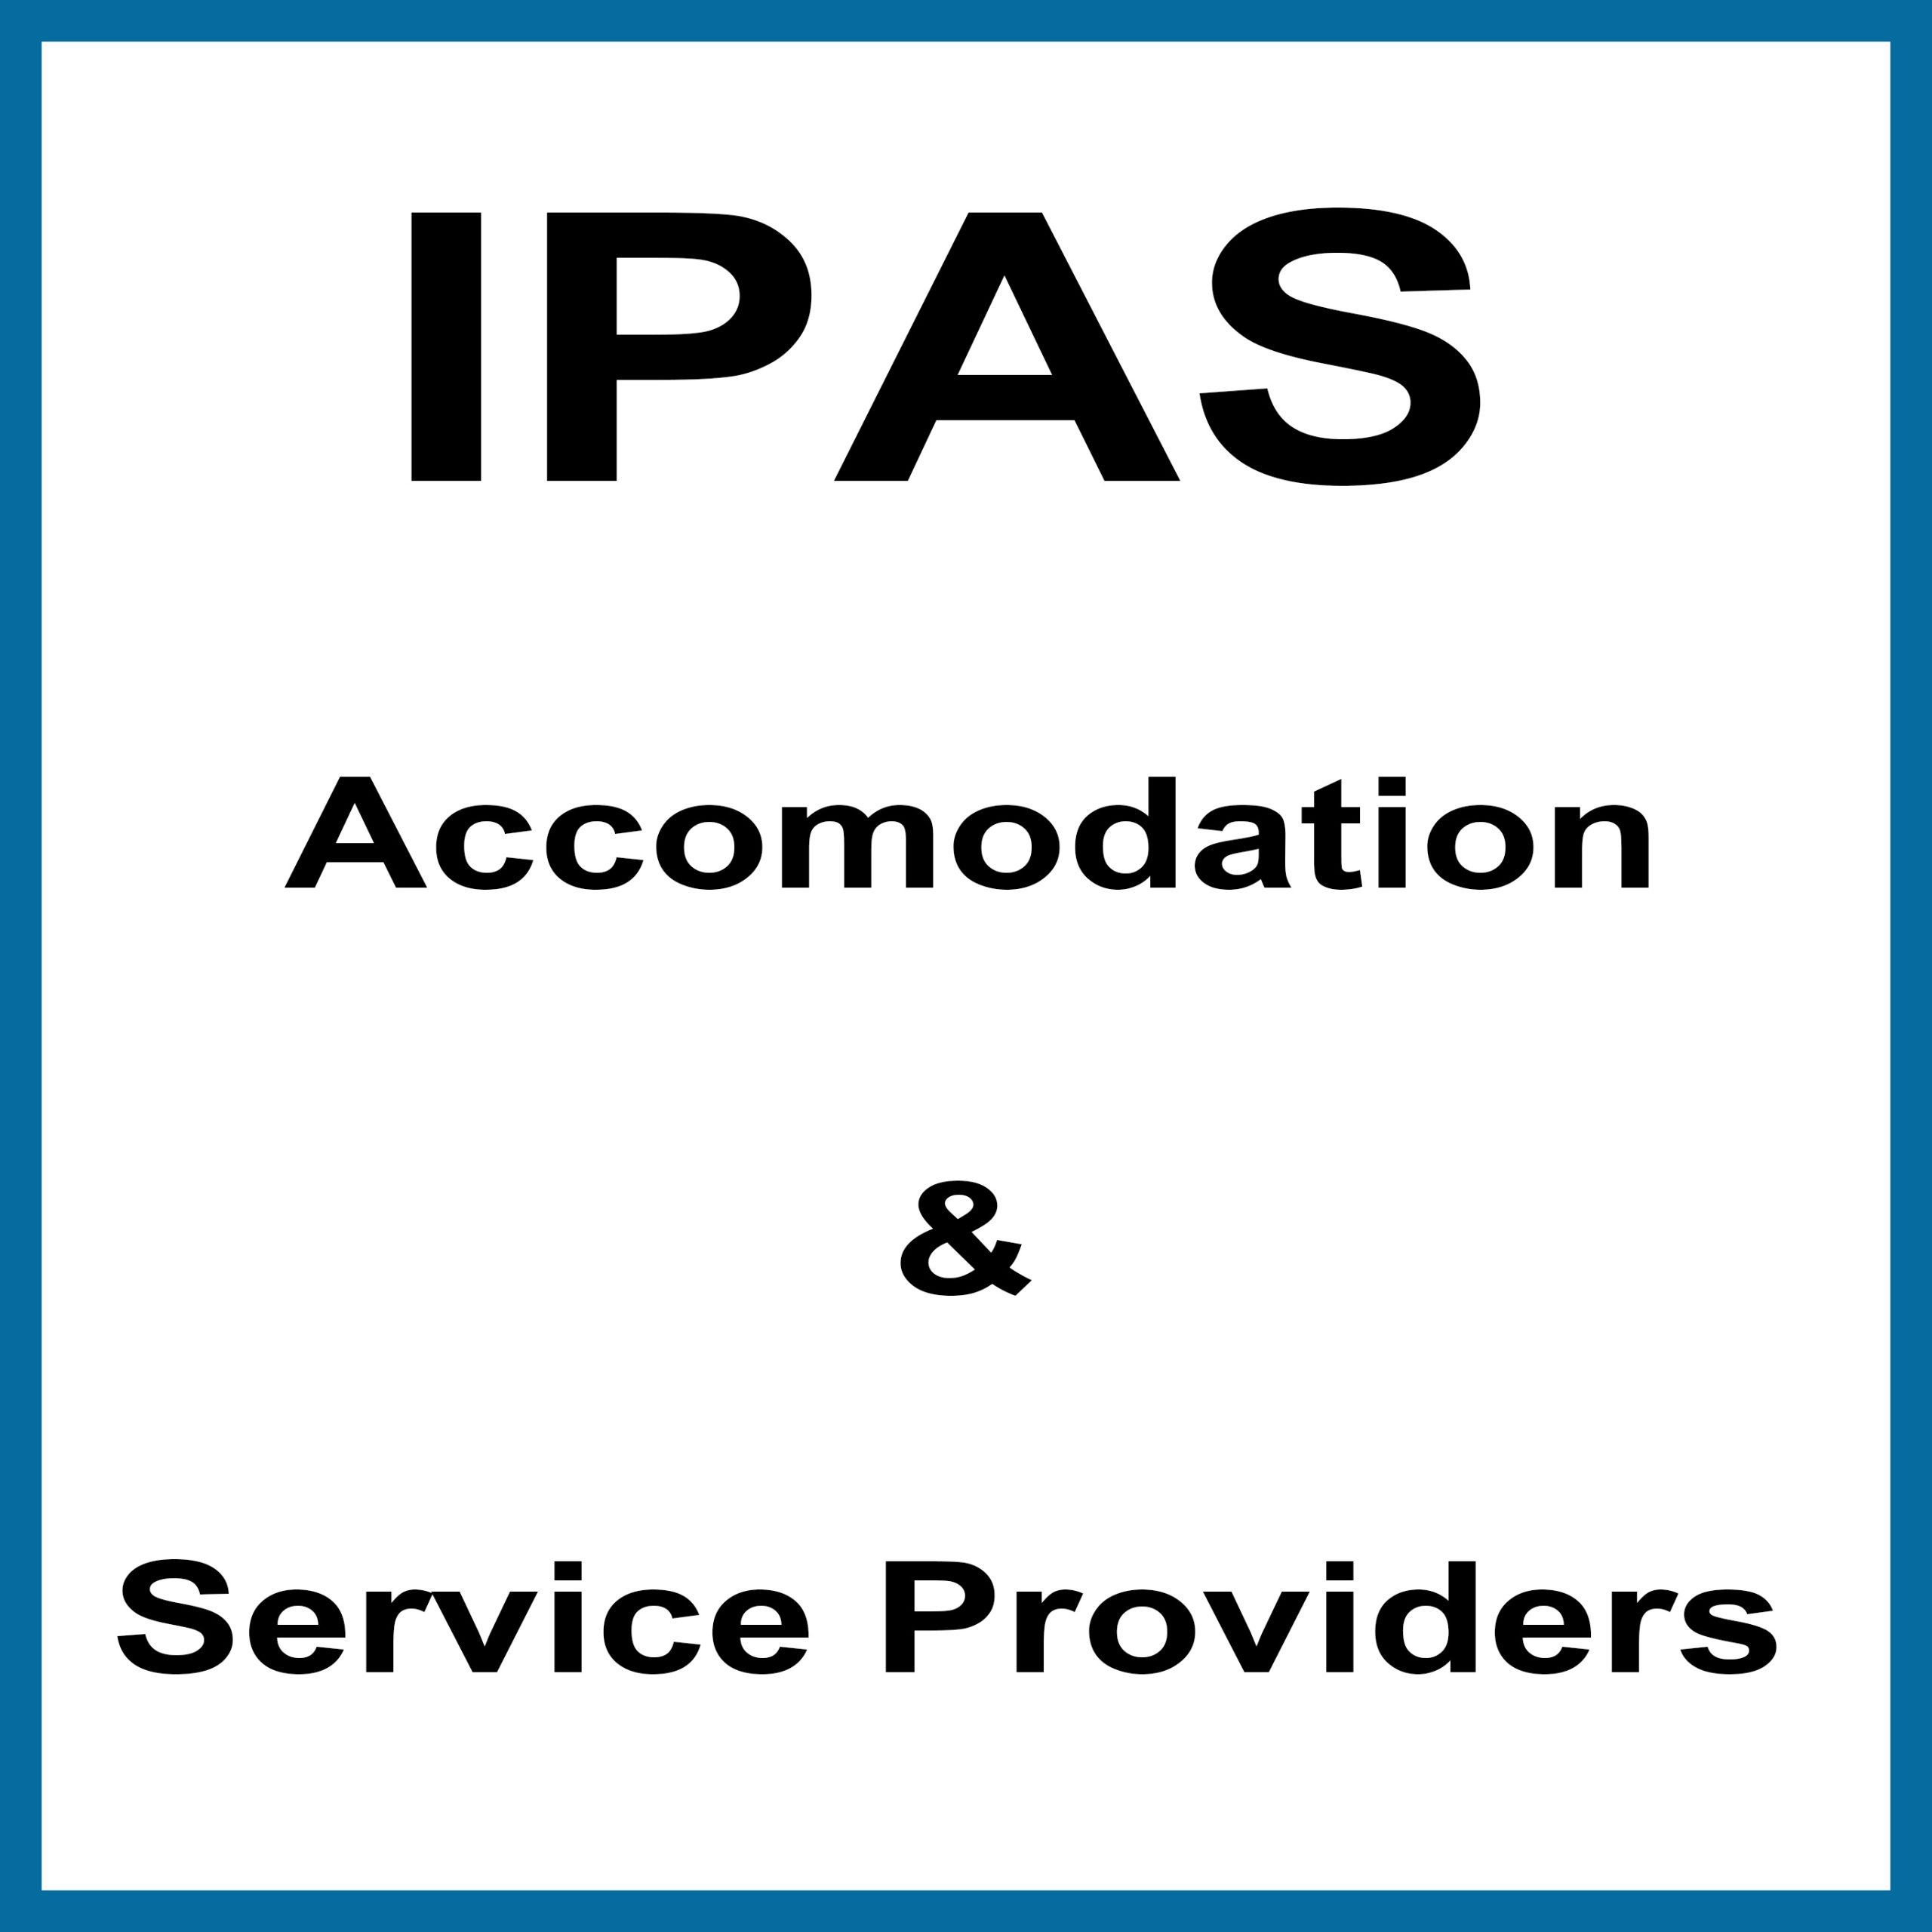 IPAS Accommodation and Service Providers. Completely out of control now, a free for all money bonanza business. 2024 figures from Extra.ie link below. Making business owners multi, multi, millionaires. With absolutely no concerns or accountability for Irish people or Irish communities.